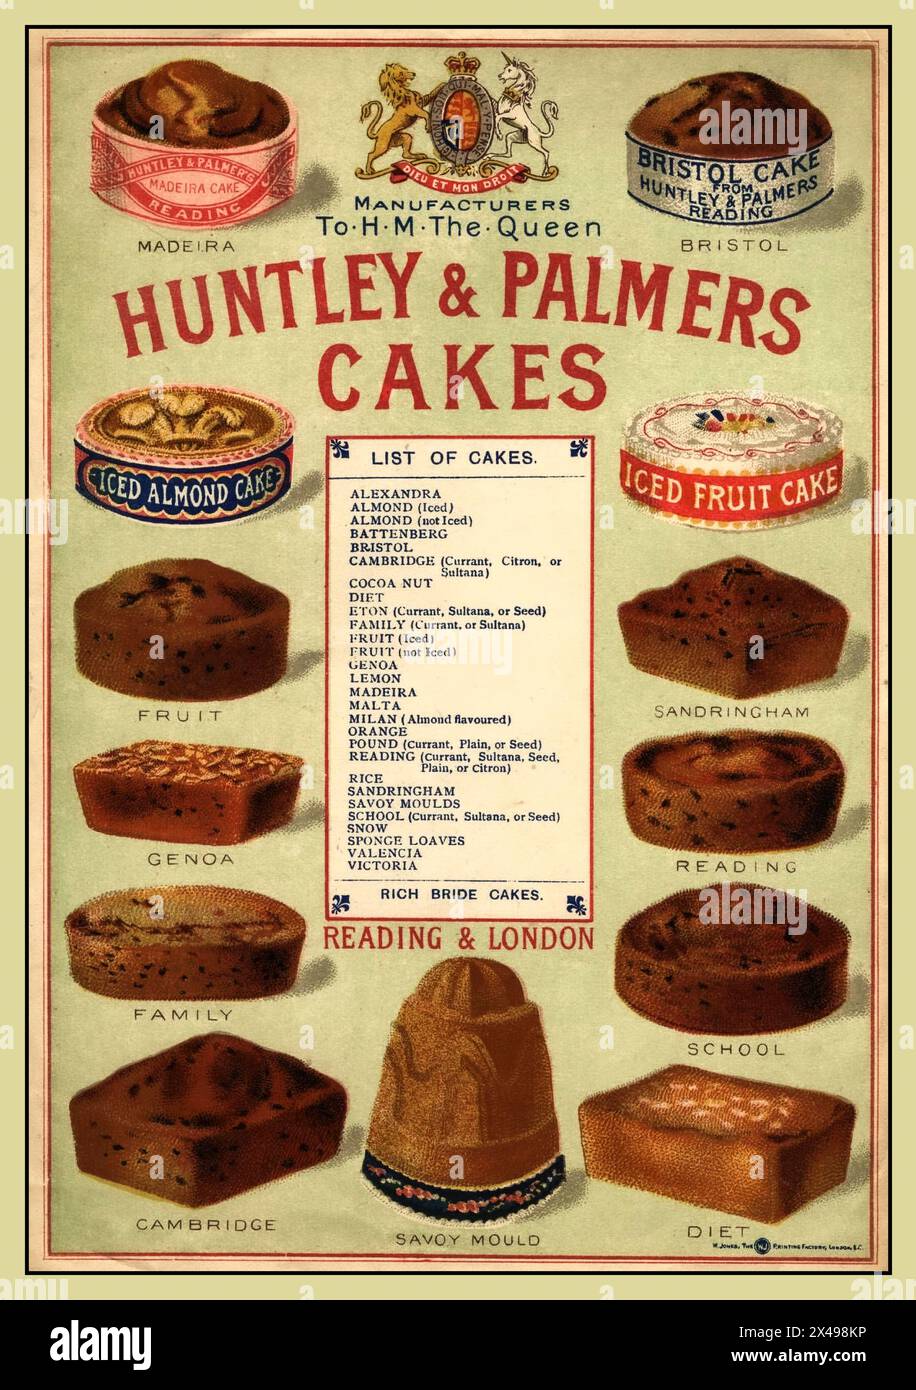 Vintage CAKES poster for Huntley & Palmers Cakes. Variety of cakes illustrated including, Madeira,Bristol, Iced Almond Cake, Fruit, Genoa, Cakes Etc By Royal Appointment to HM The Queen. Wide selection of British English Traditional cakes. Stock Photo